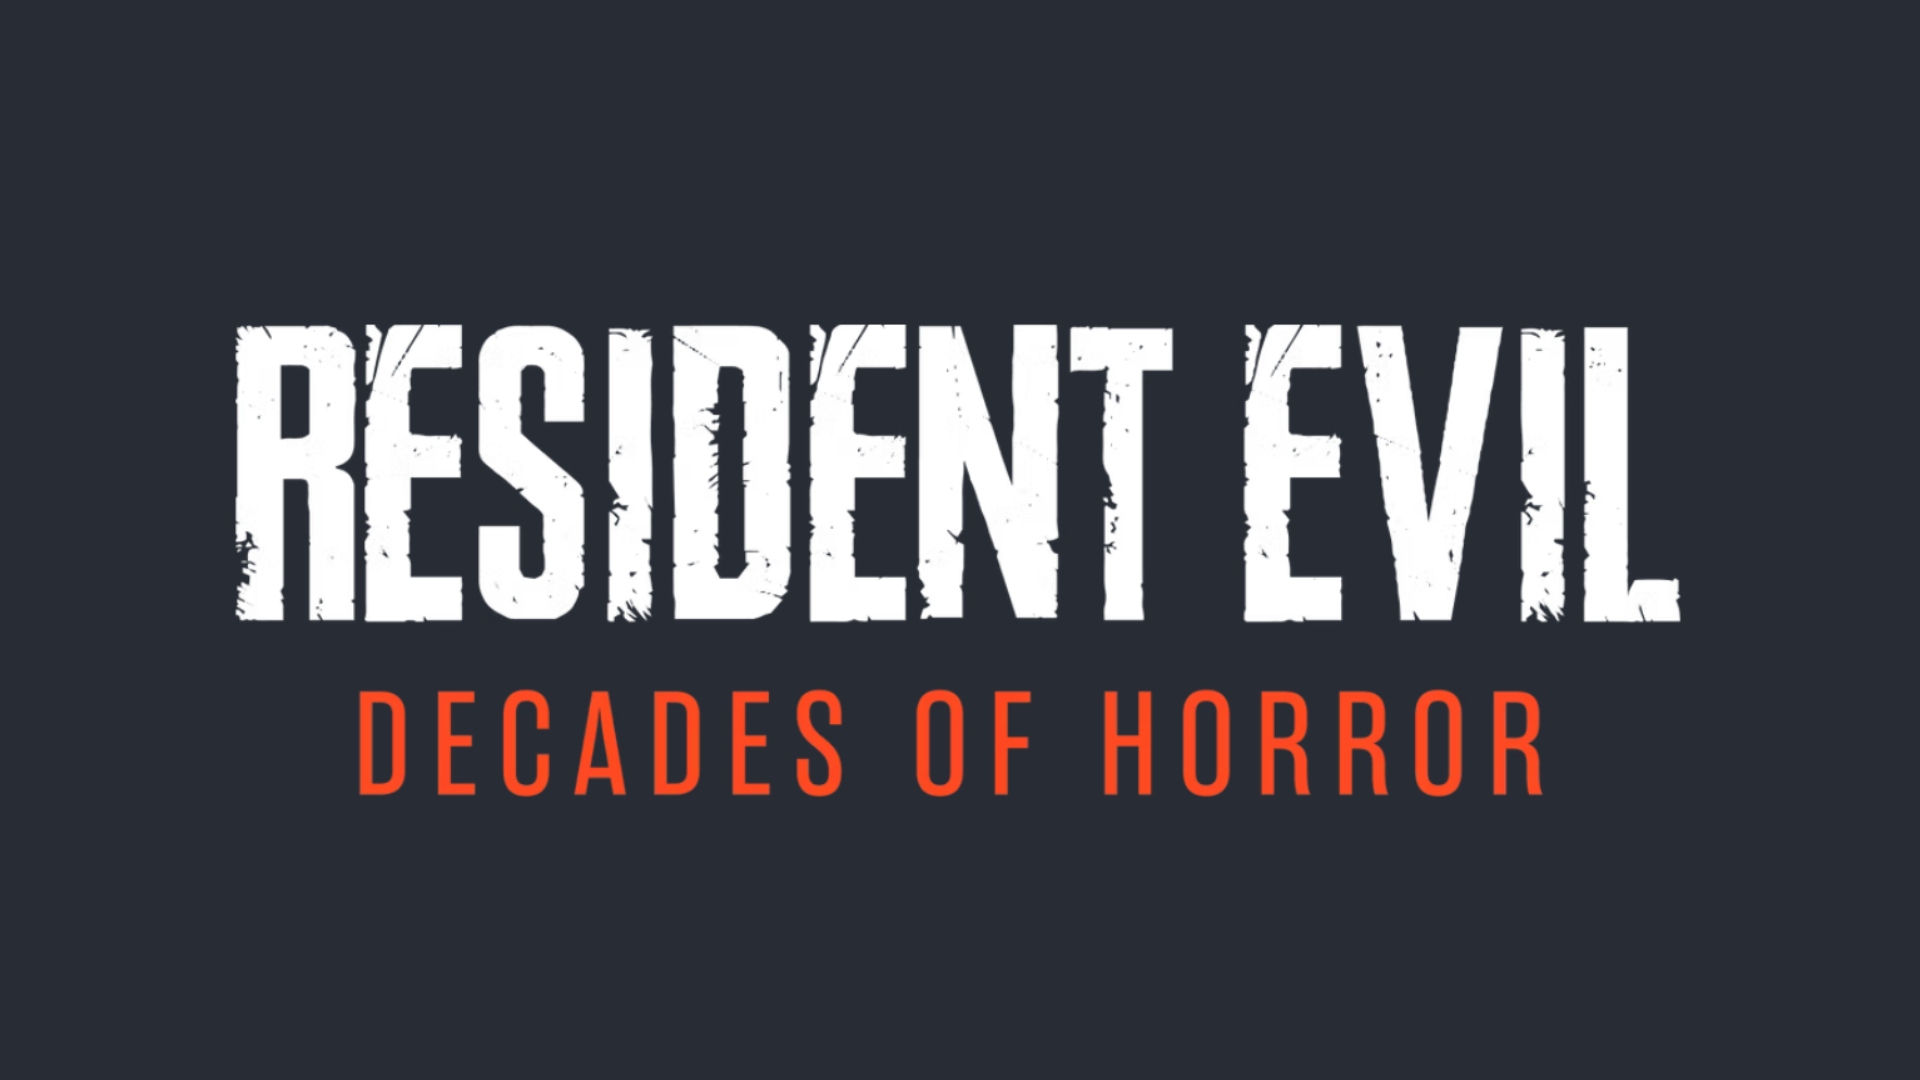 Resident Evil $30 Humble Bundle Includes 10 Games — Only $1 for Three  Titles?